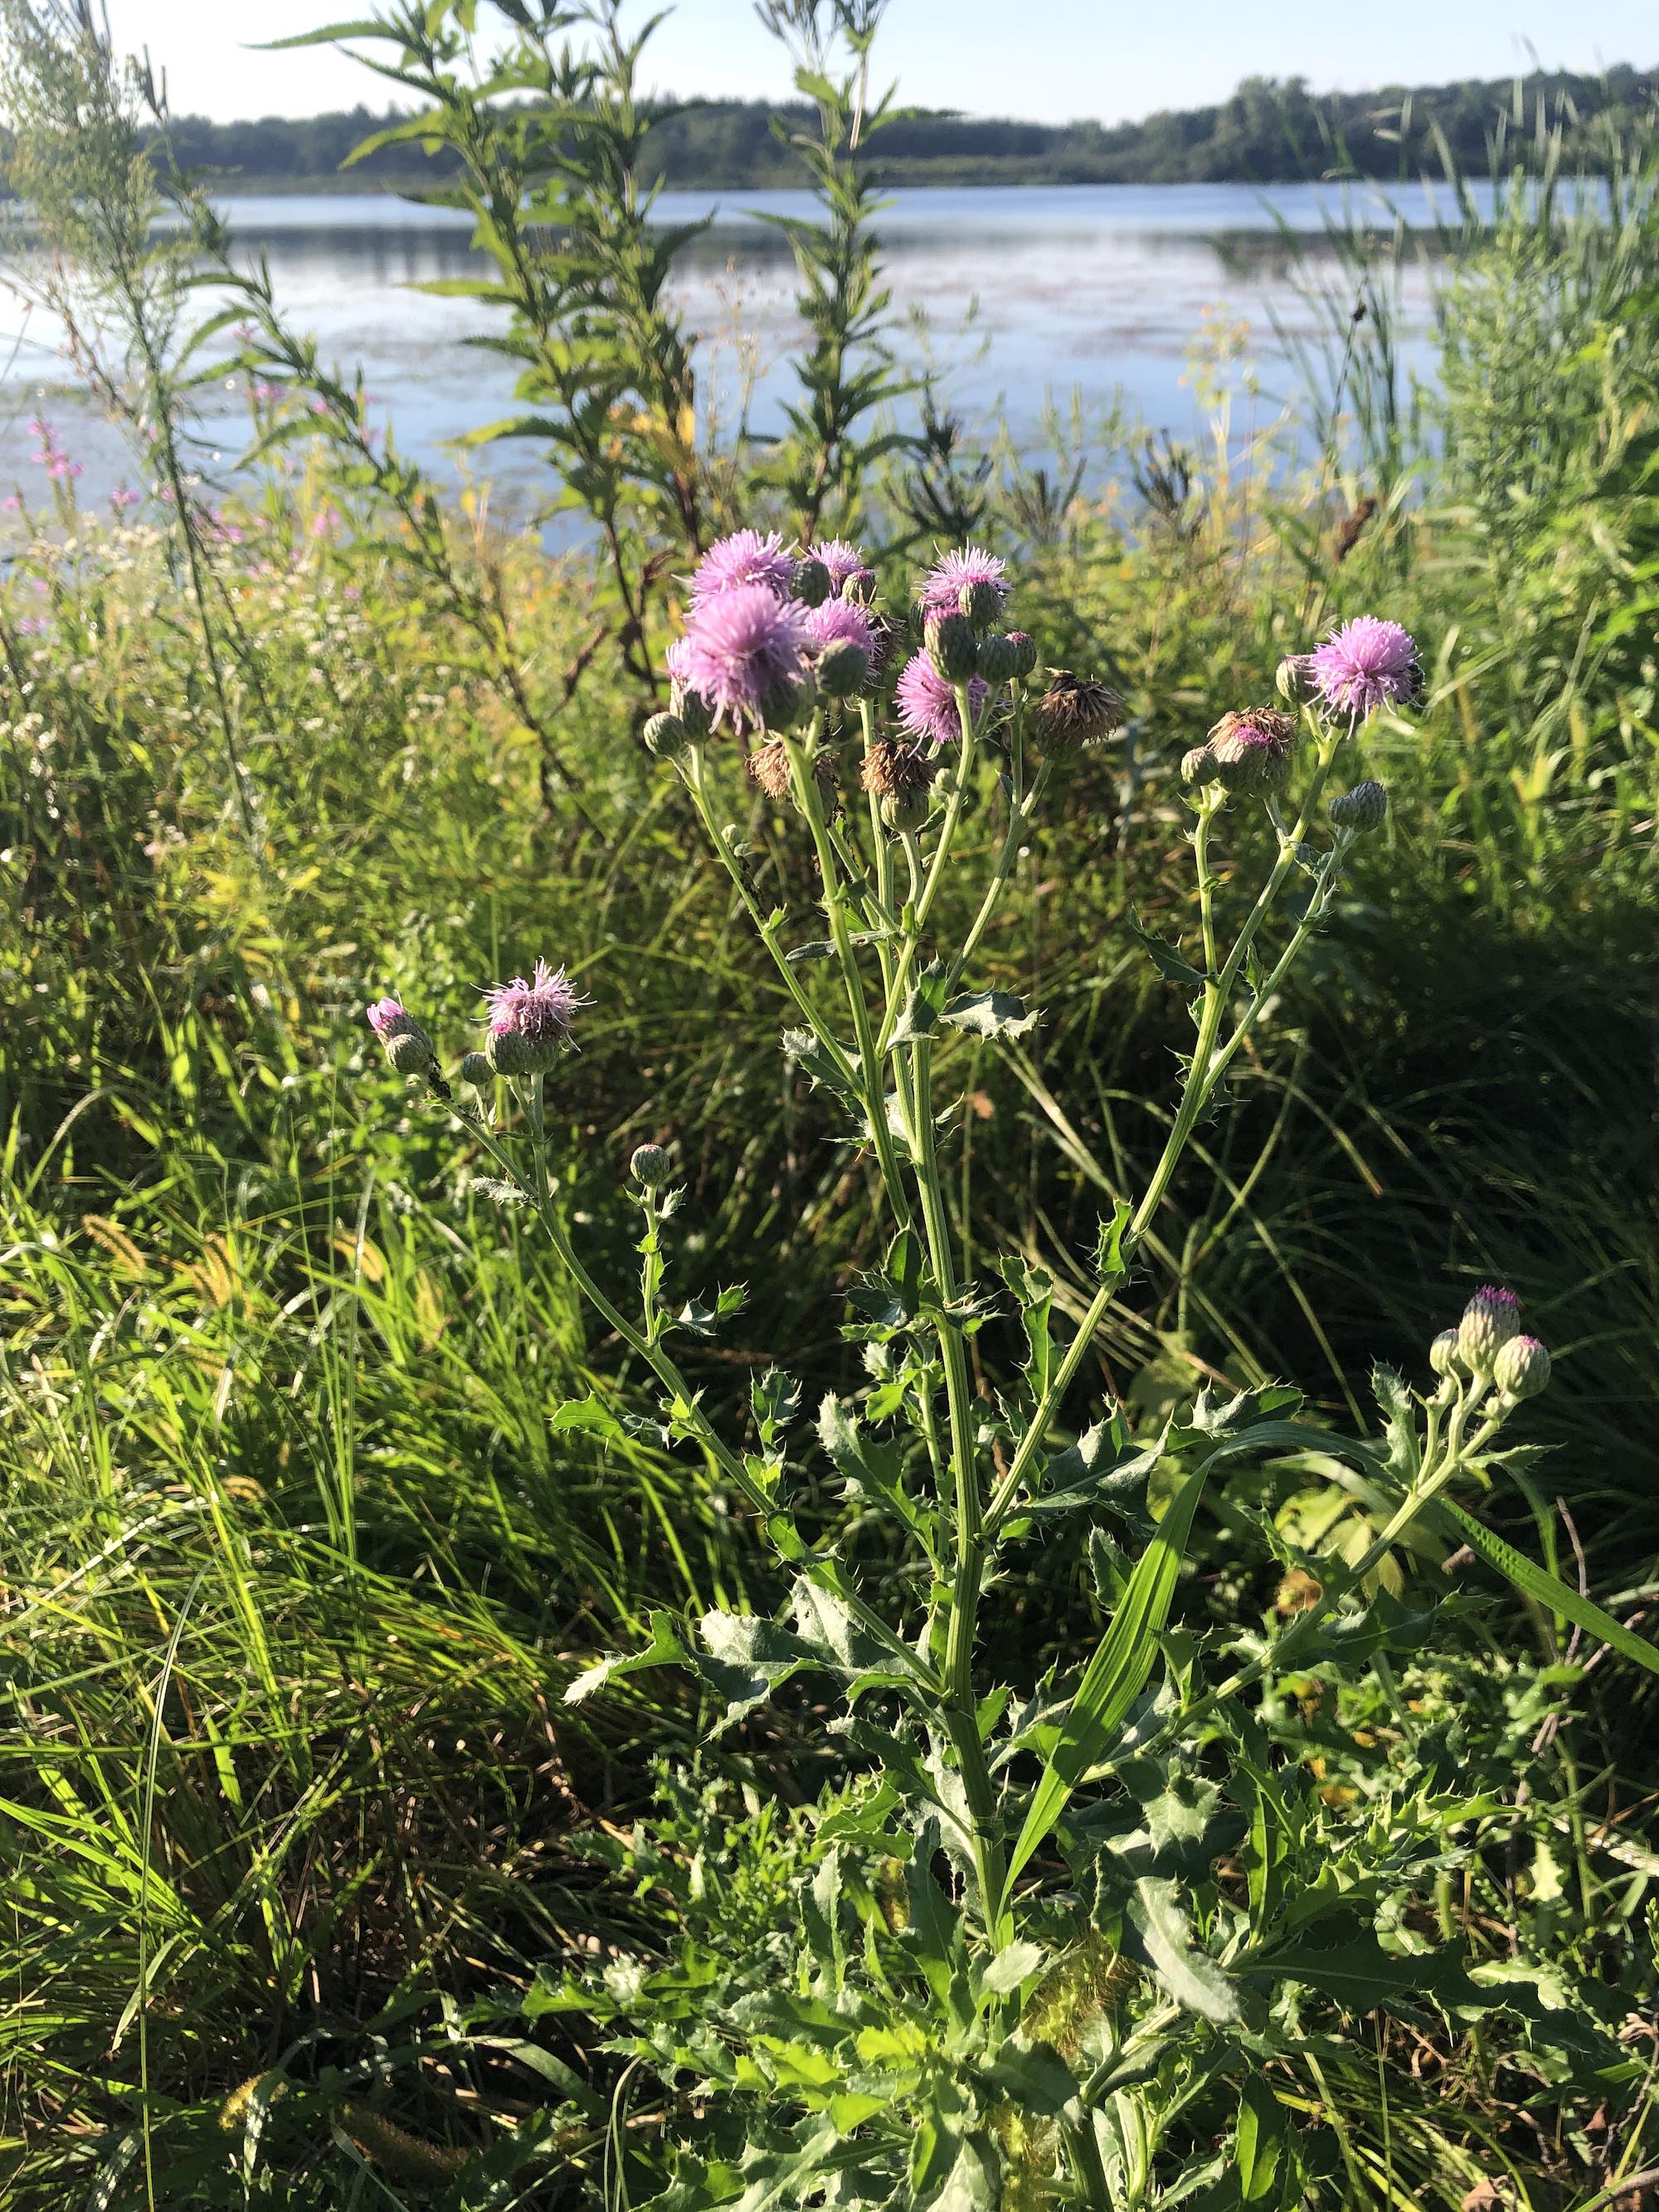 Canada Thistle on the shore of Lake Wingra in Wingra Park in Madison, Wisconsin on August 17, 2022.